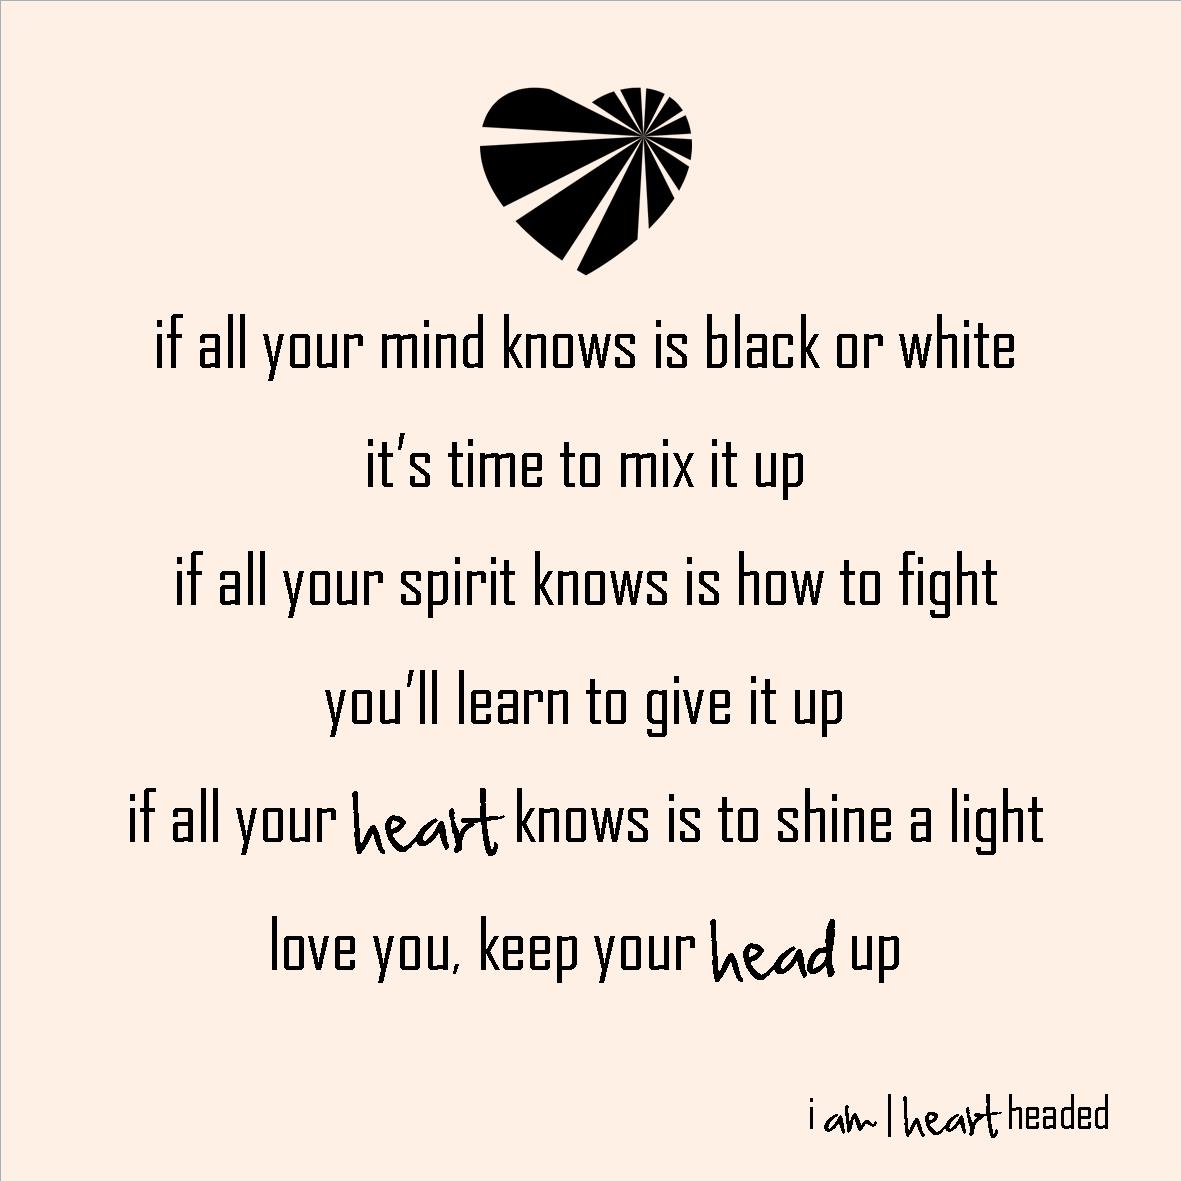 full-size featured image of quote 'keep your head up' in category 'sparkly' at i am | heart headed